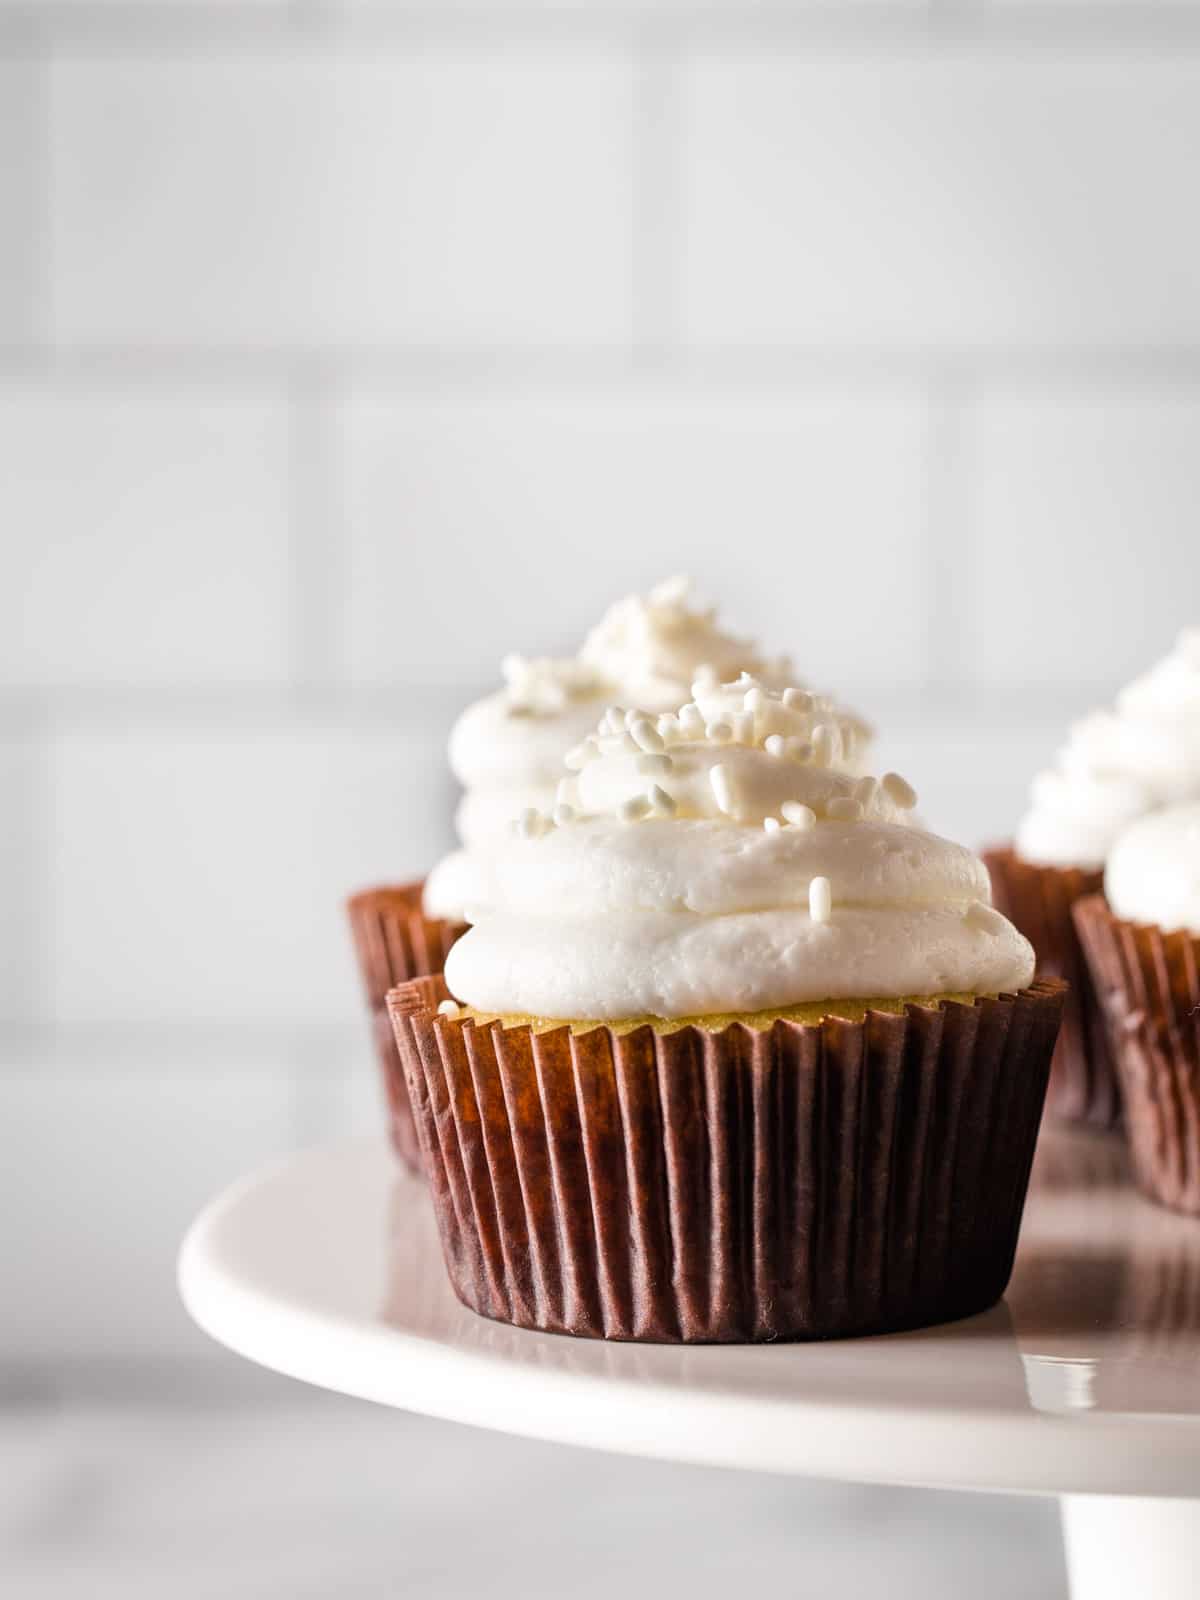 Gluten-free vanilla cupcakes with white frosting on a cake platter.